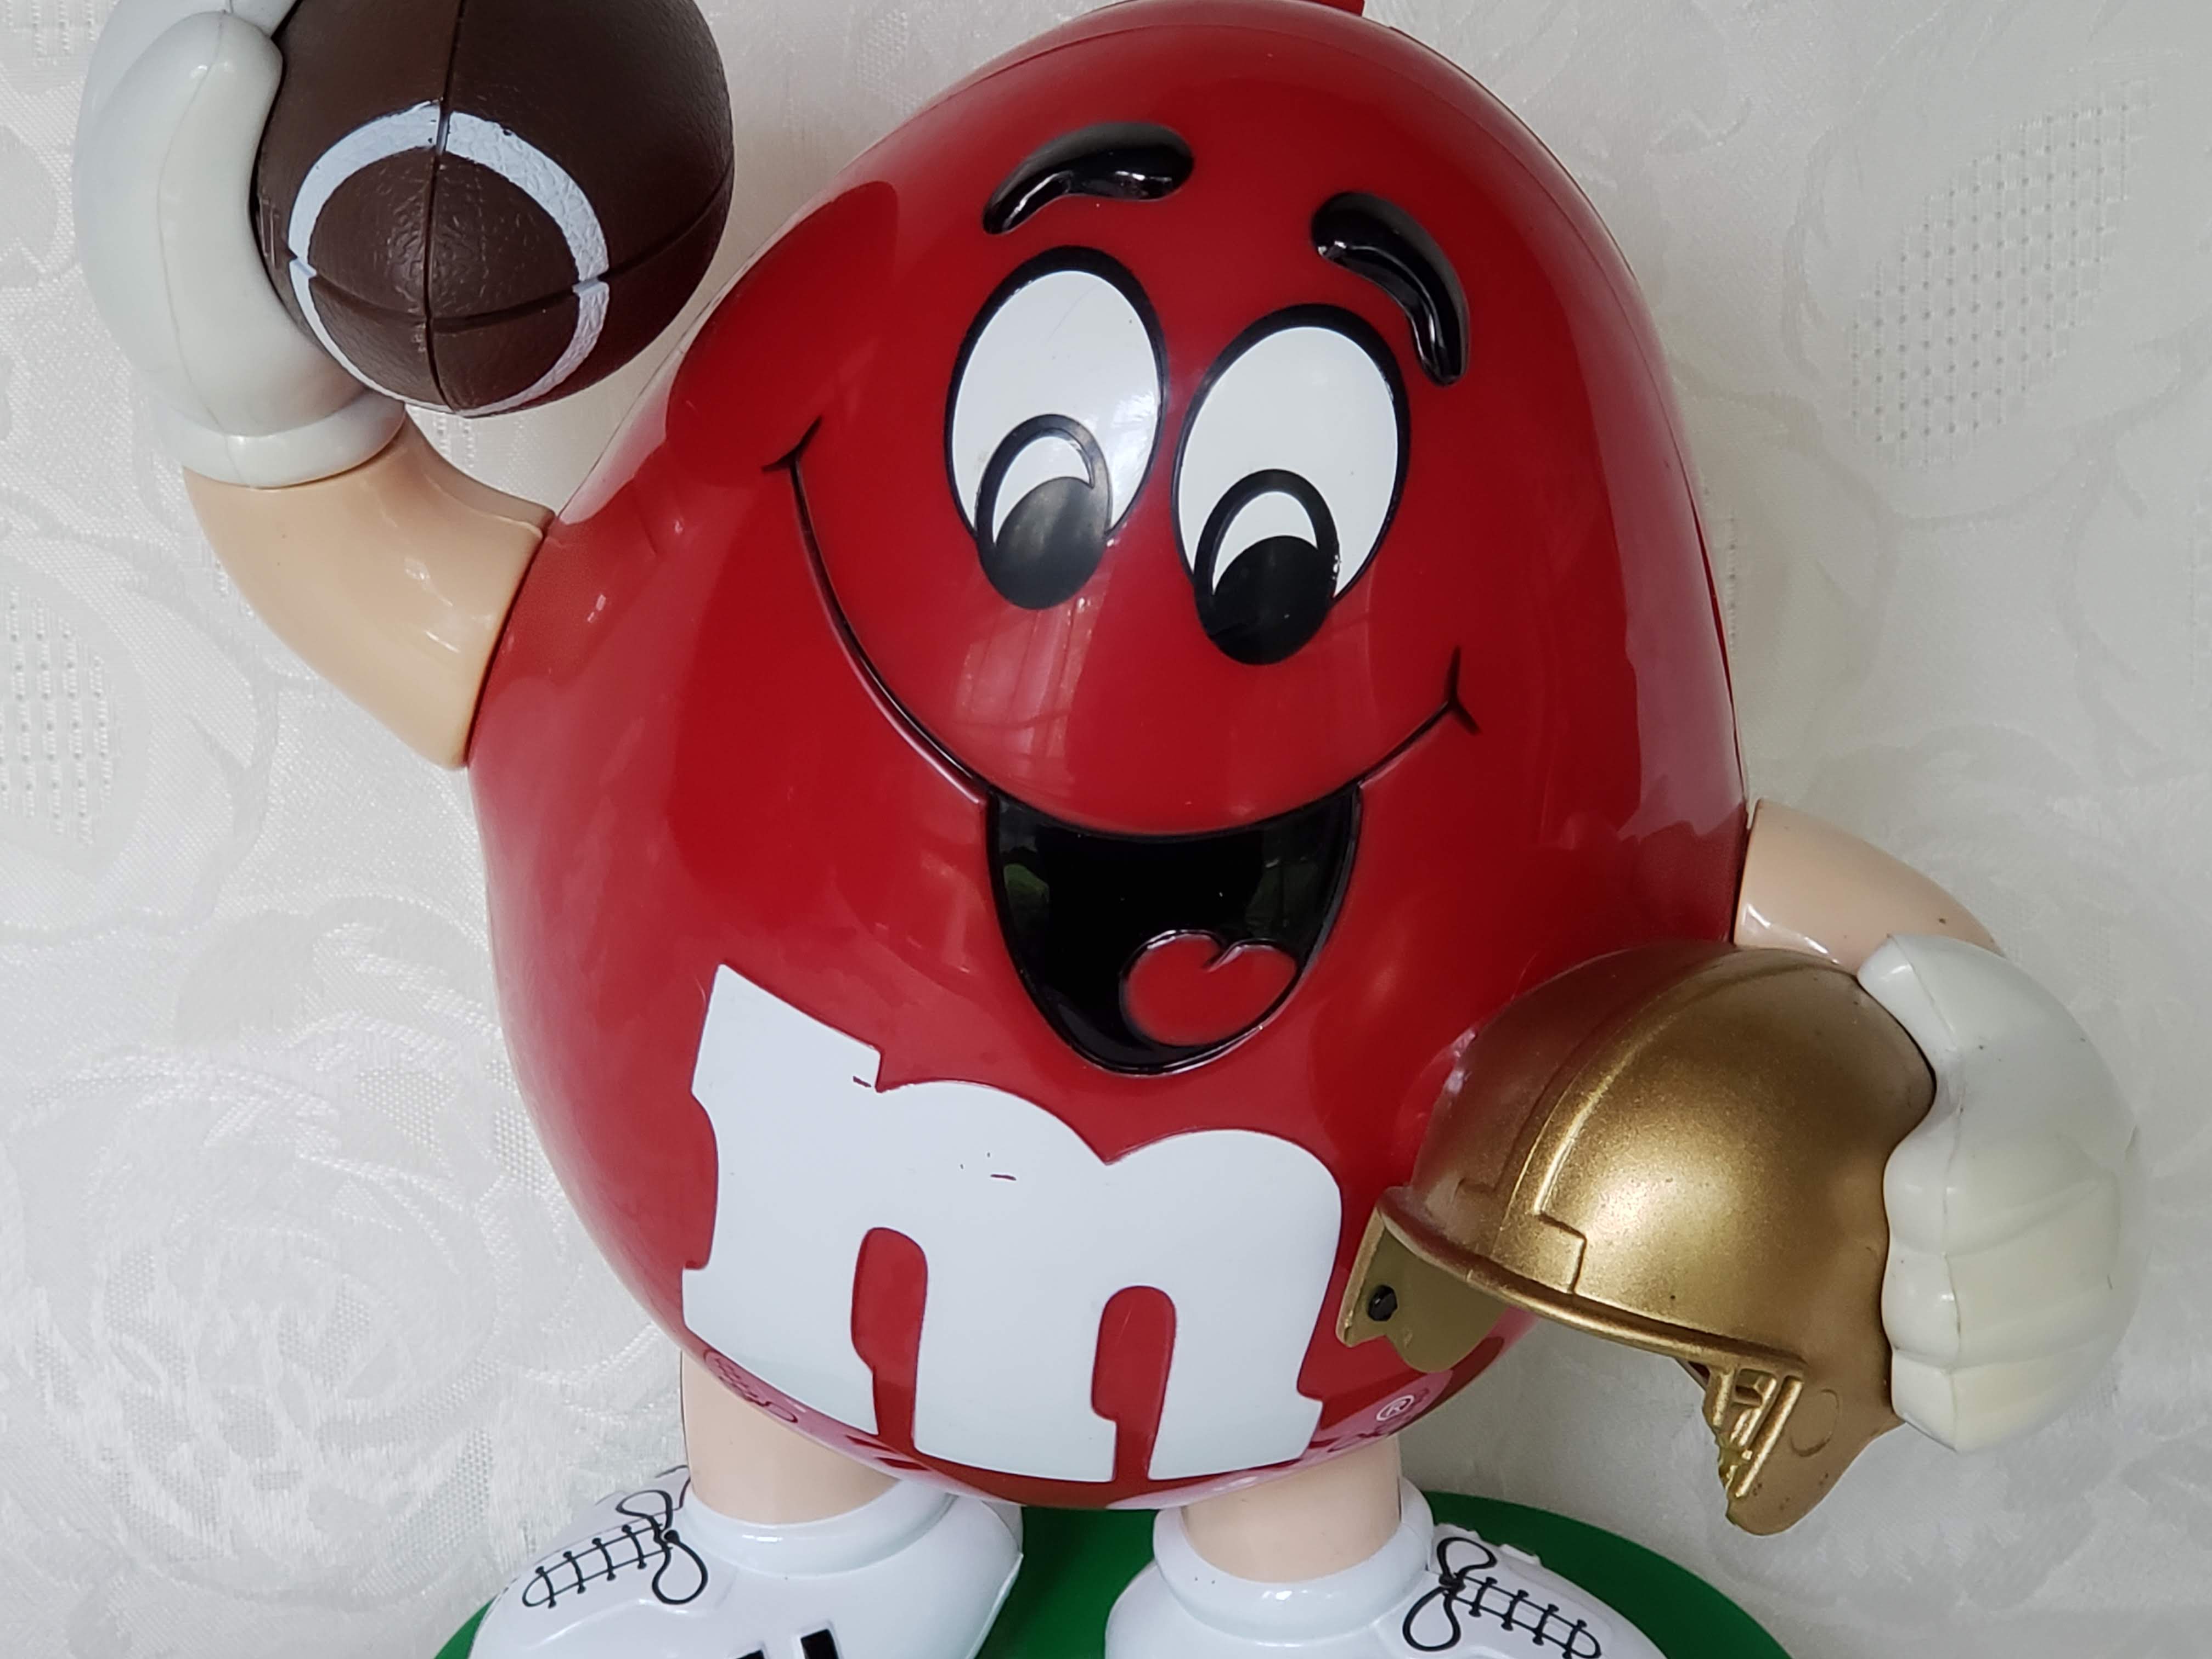 Vintage M&M Football Player Candy Dispenser Red Mm Guy 